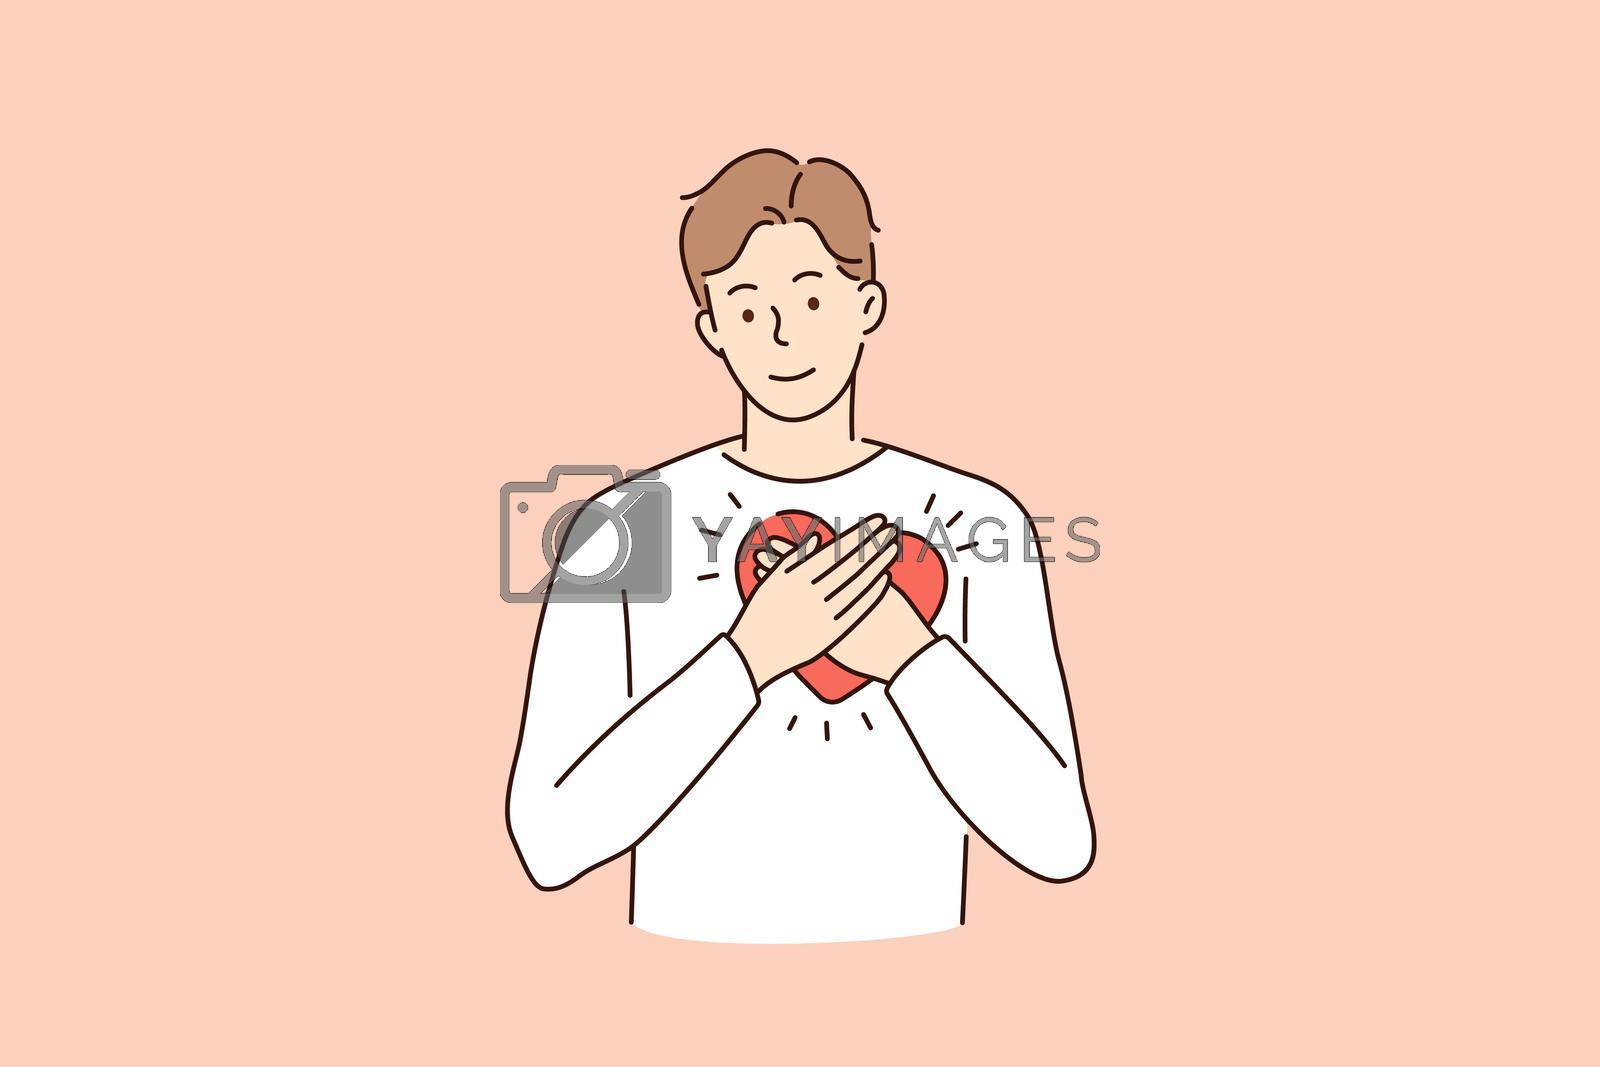 Love tenderness and care concept. Young smiling man cartoon character standing embracing big red heart over heart place vector illustration